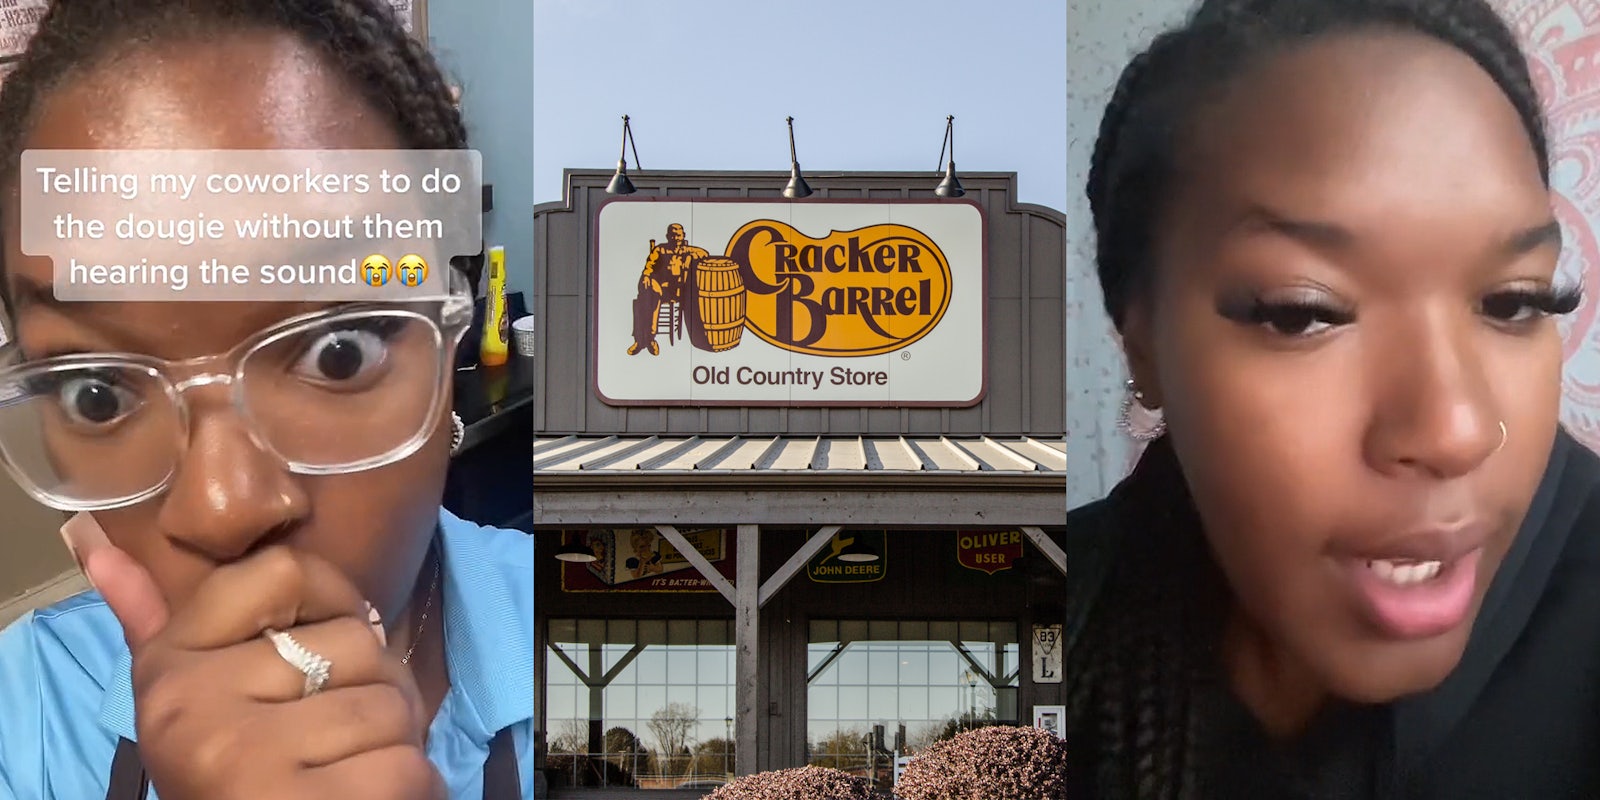 Cracker Barrel employee hand on mouth caption 'Telling my coworkers to do the dougie without them hearing the sound' (l) Cracker Barrel sign on building (c) woman speaking (r)